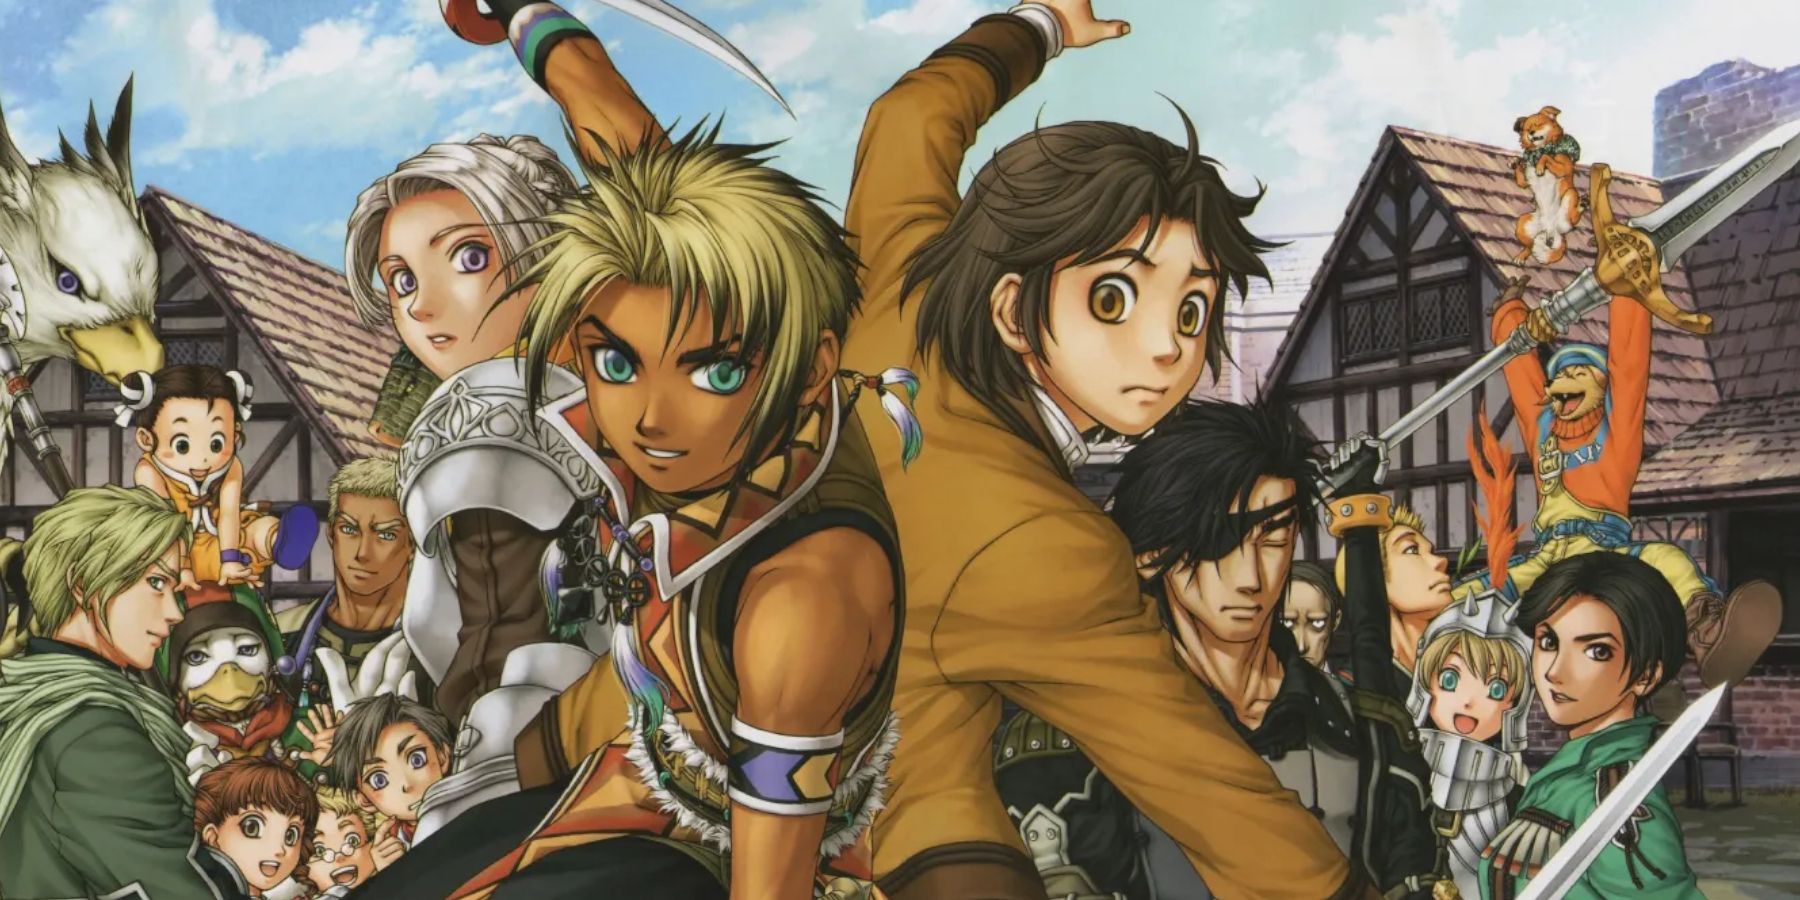 Suikoden 3 the Trinity protagonists and some of the 108 Stars